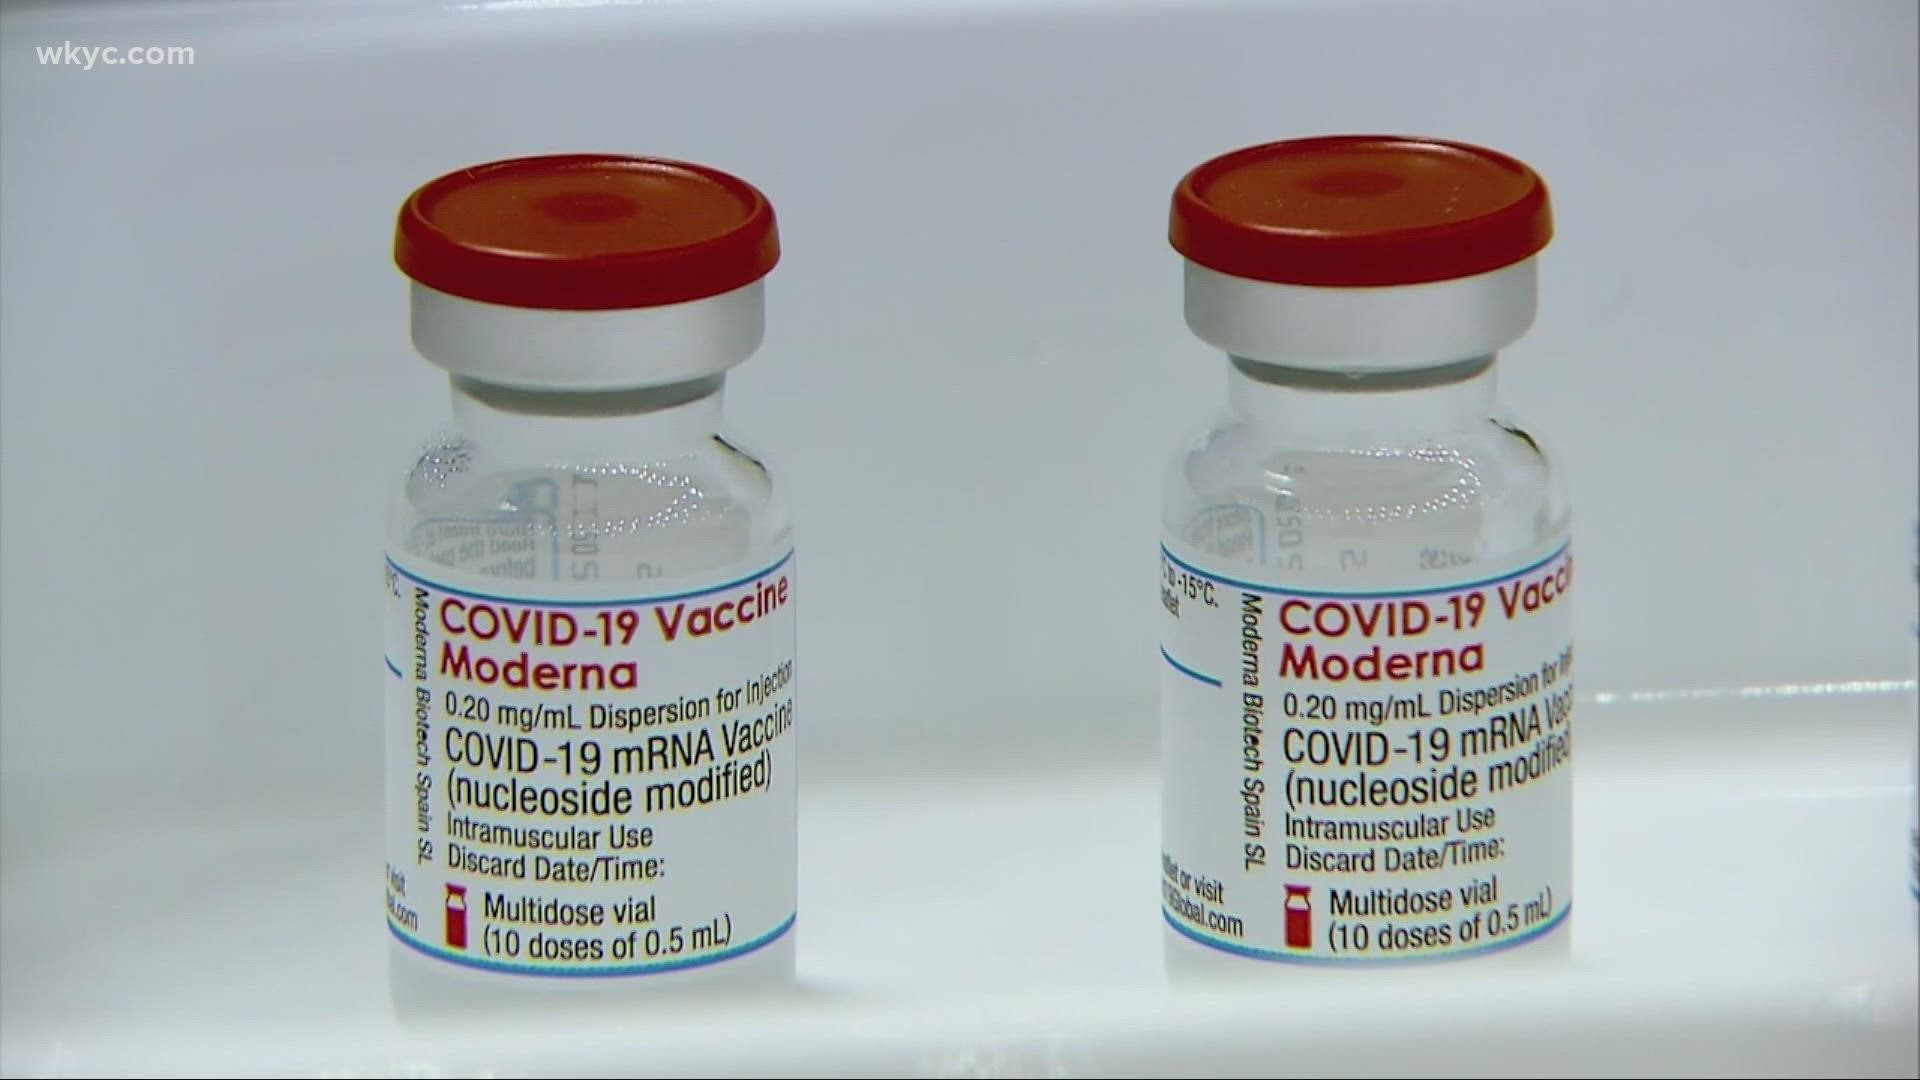 Here's what parents need to know as Moderna seeks FDA approval of its COVID-19 vaccine for the youngest children ages 5 and younger.